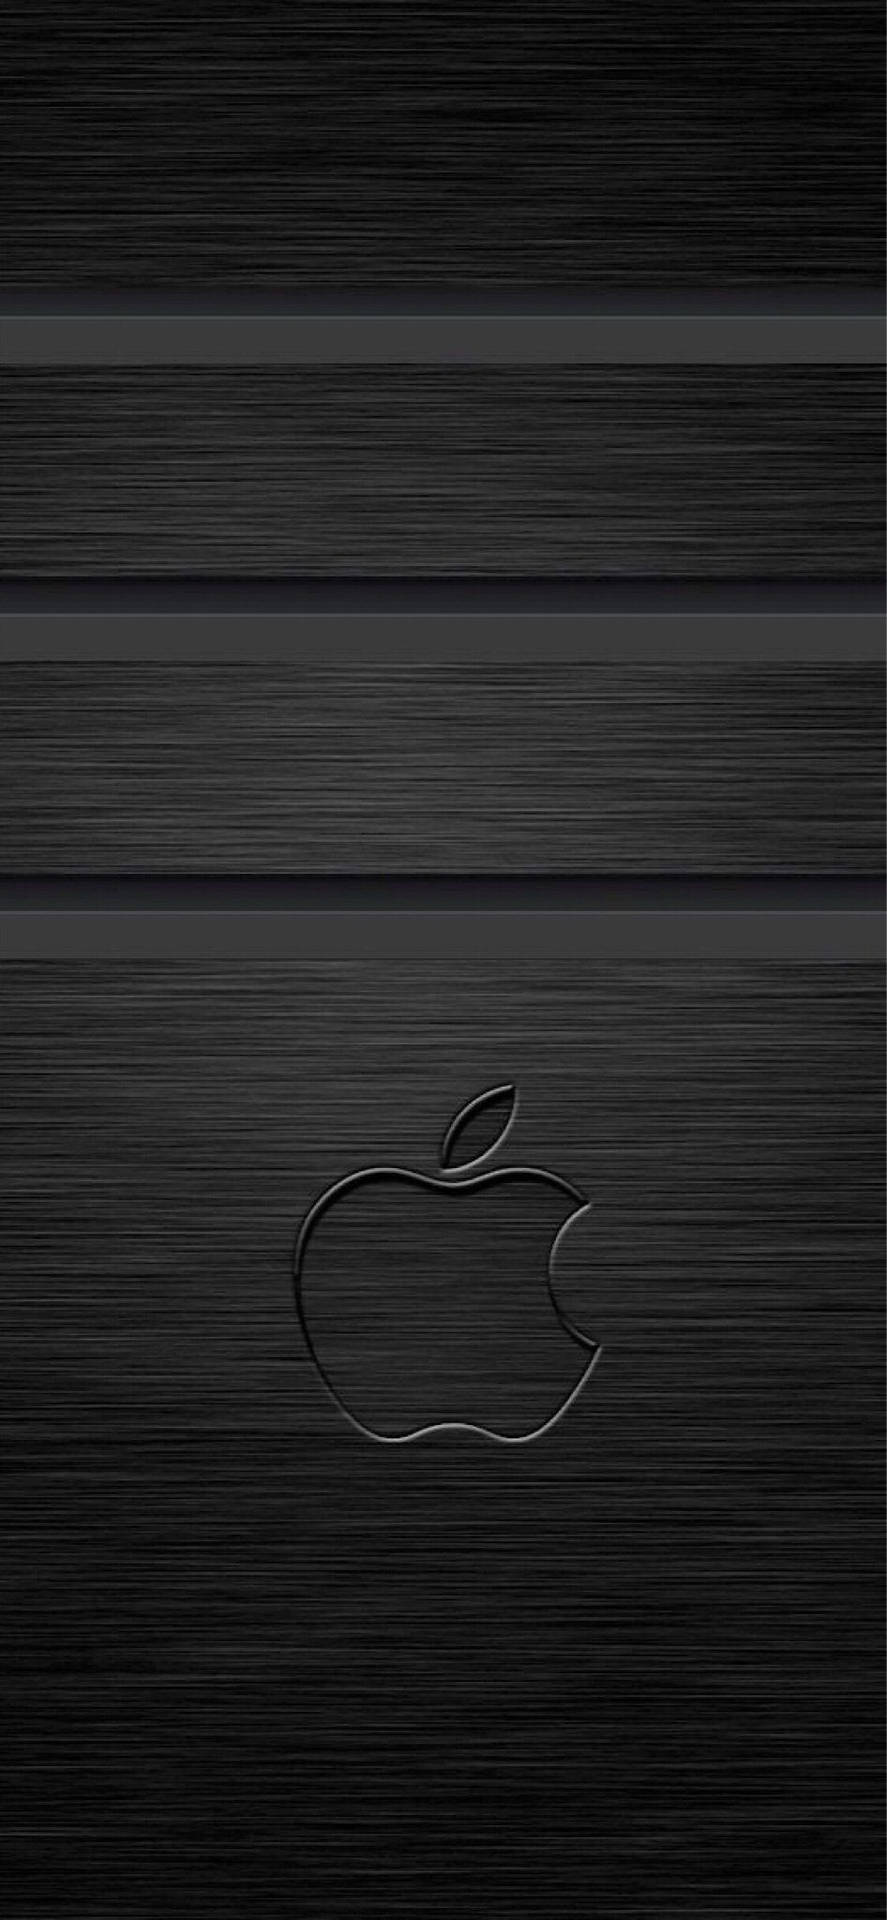 3d Iphone Engraved Apple Logo Background